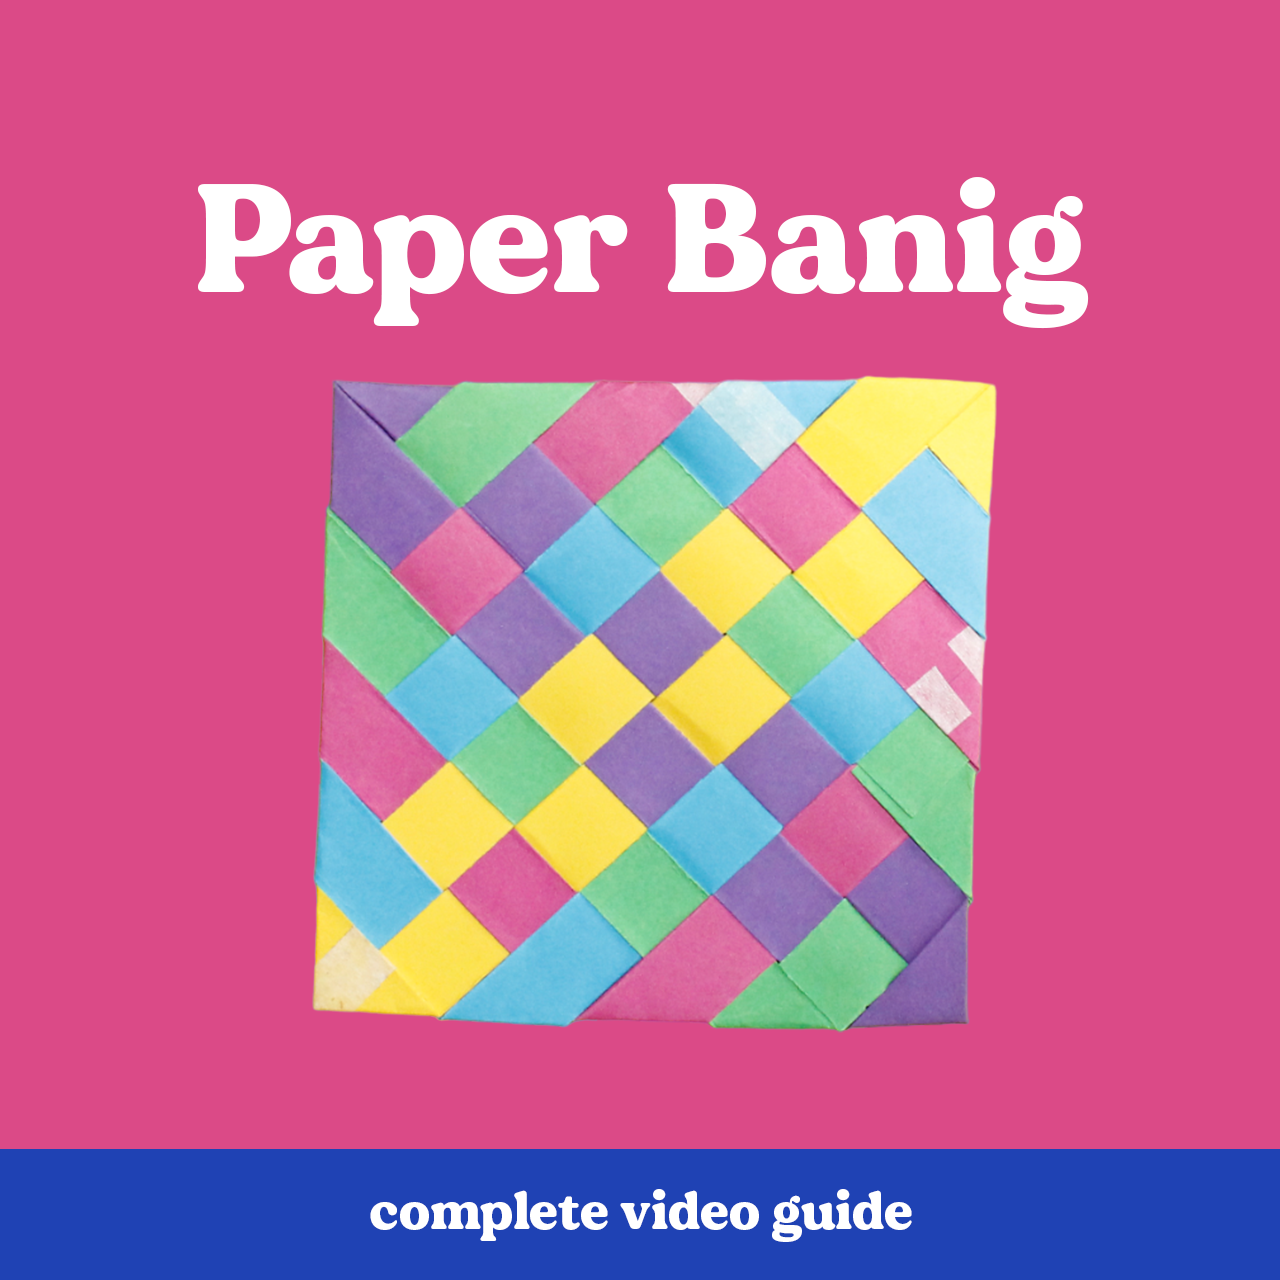 Weave-It-Yourself Paper Banig